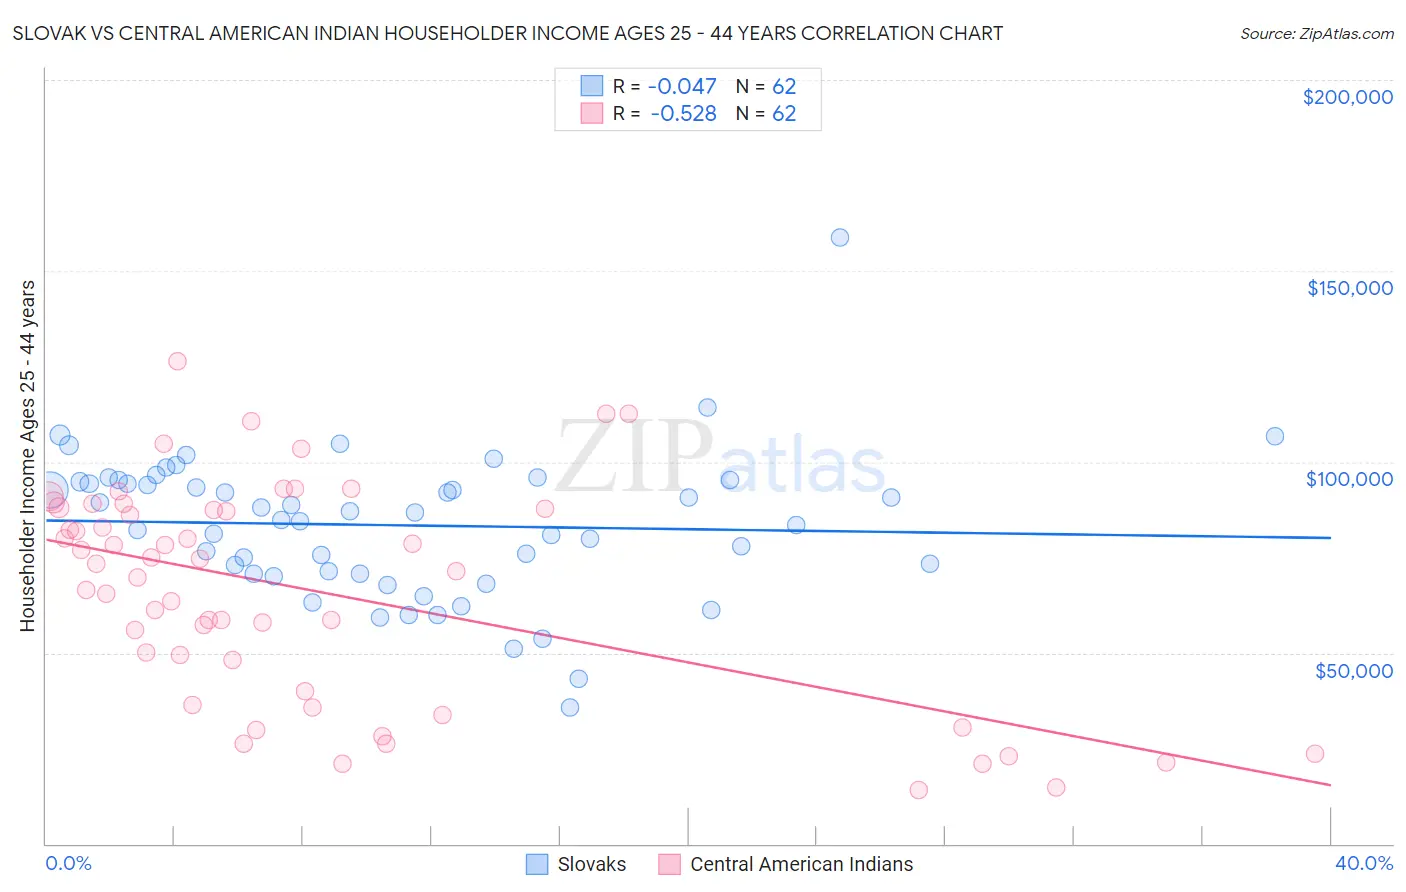 Slovak vs Central American Indian Householder Income Ages 25 - 44 years